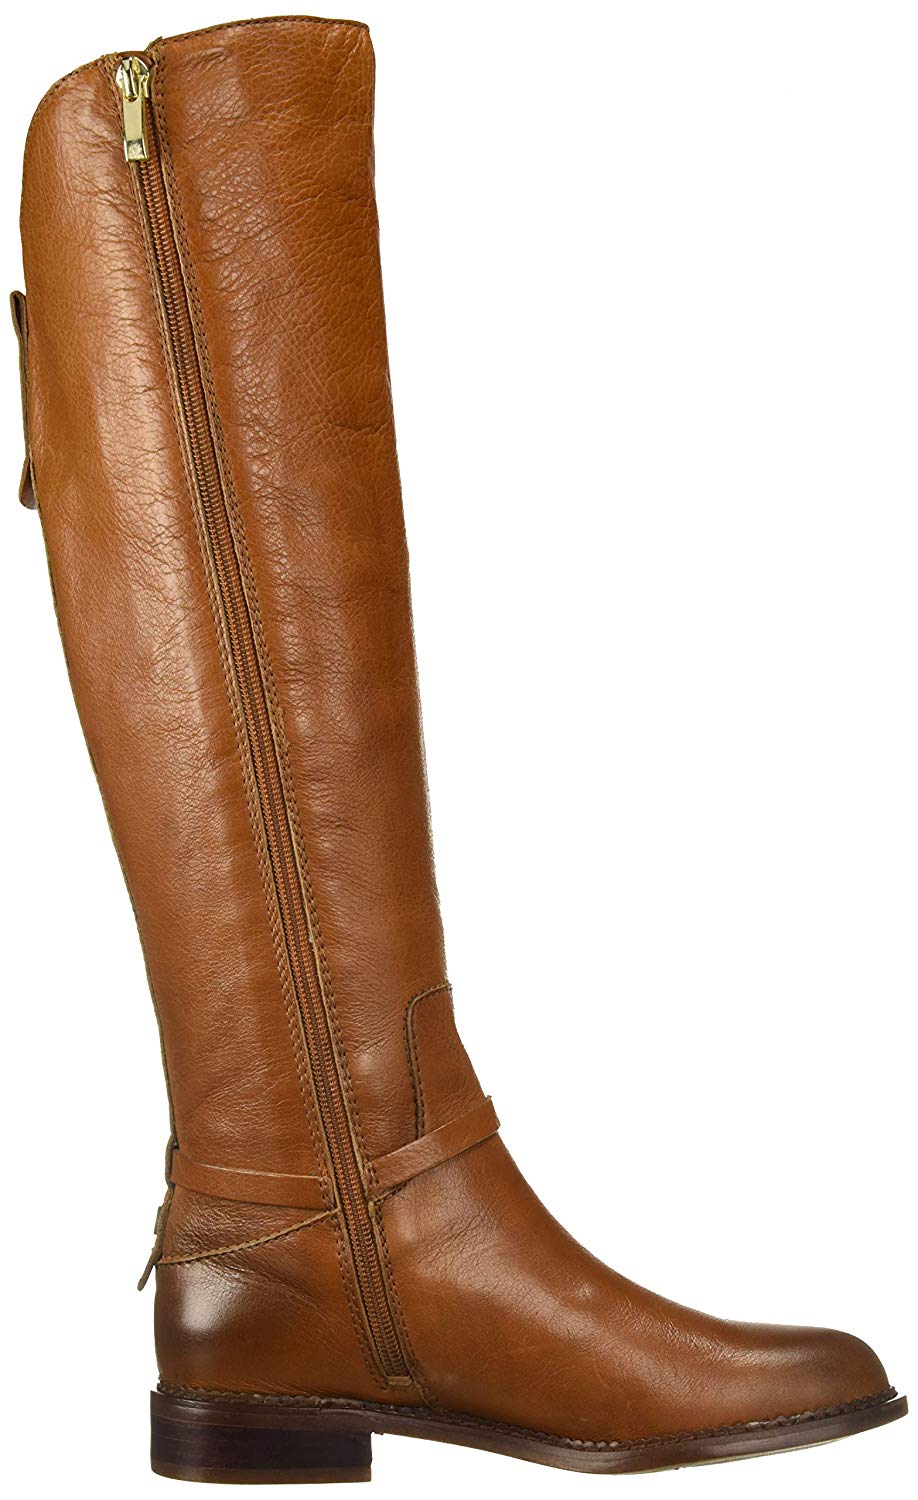 Franco Sarto Women's Haylie Knee High Boot, Cognac Leather, Size 9.0 ...